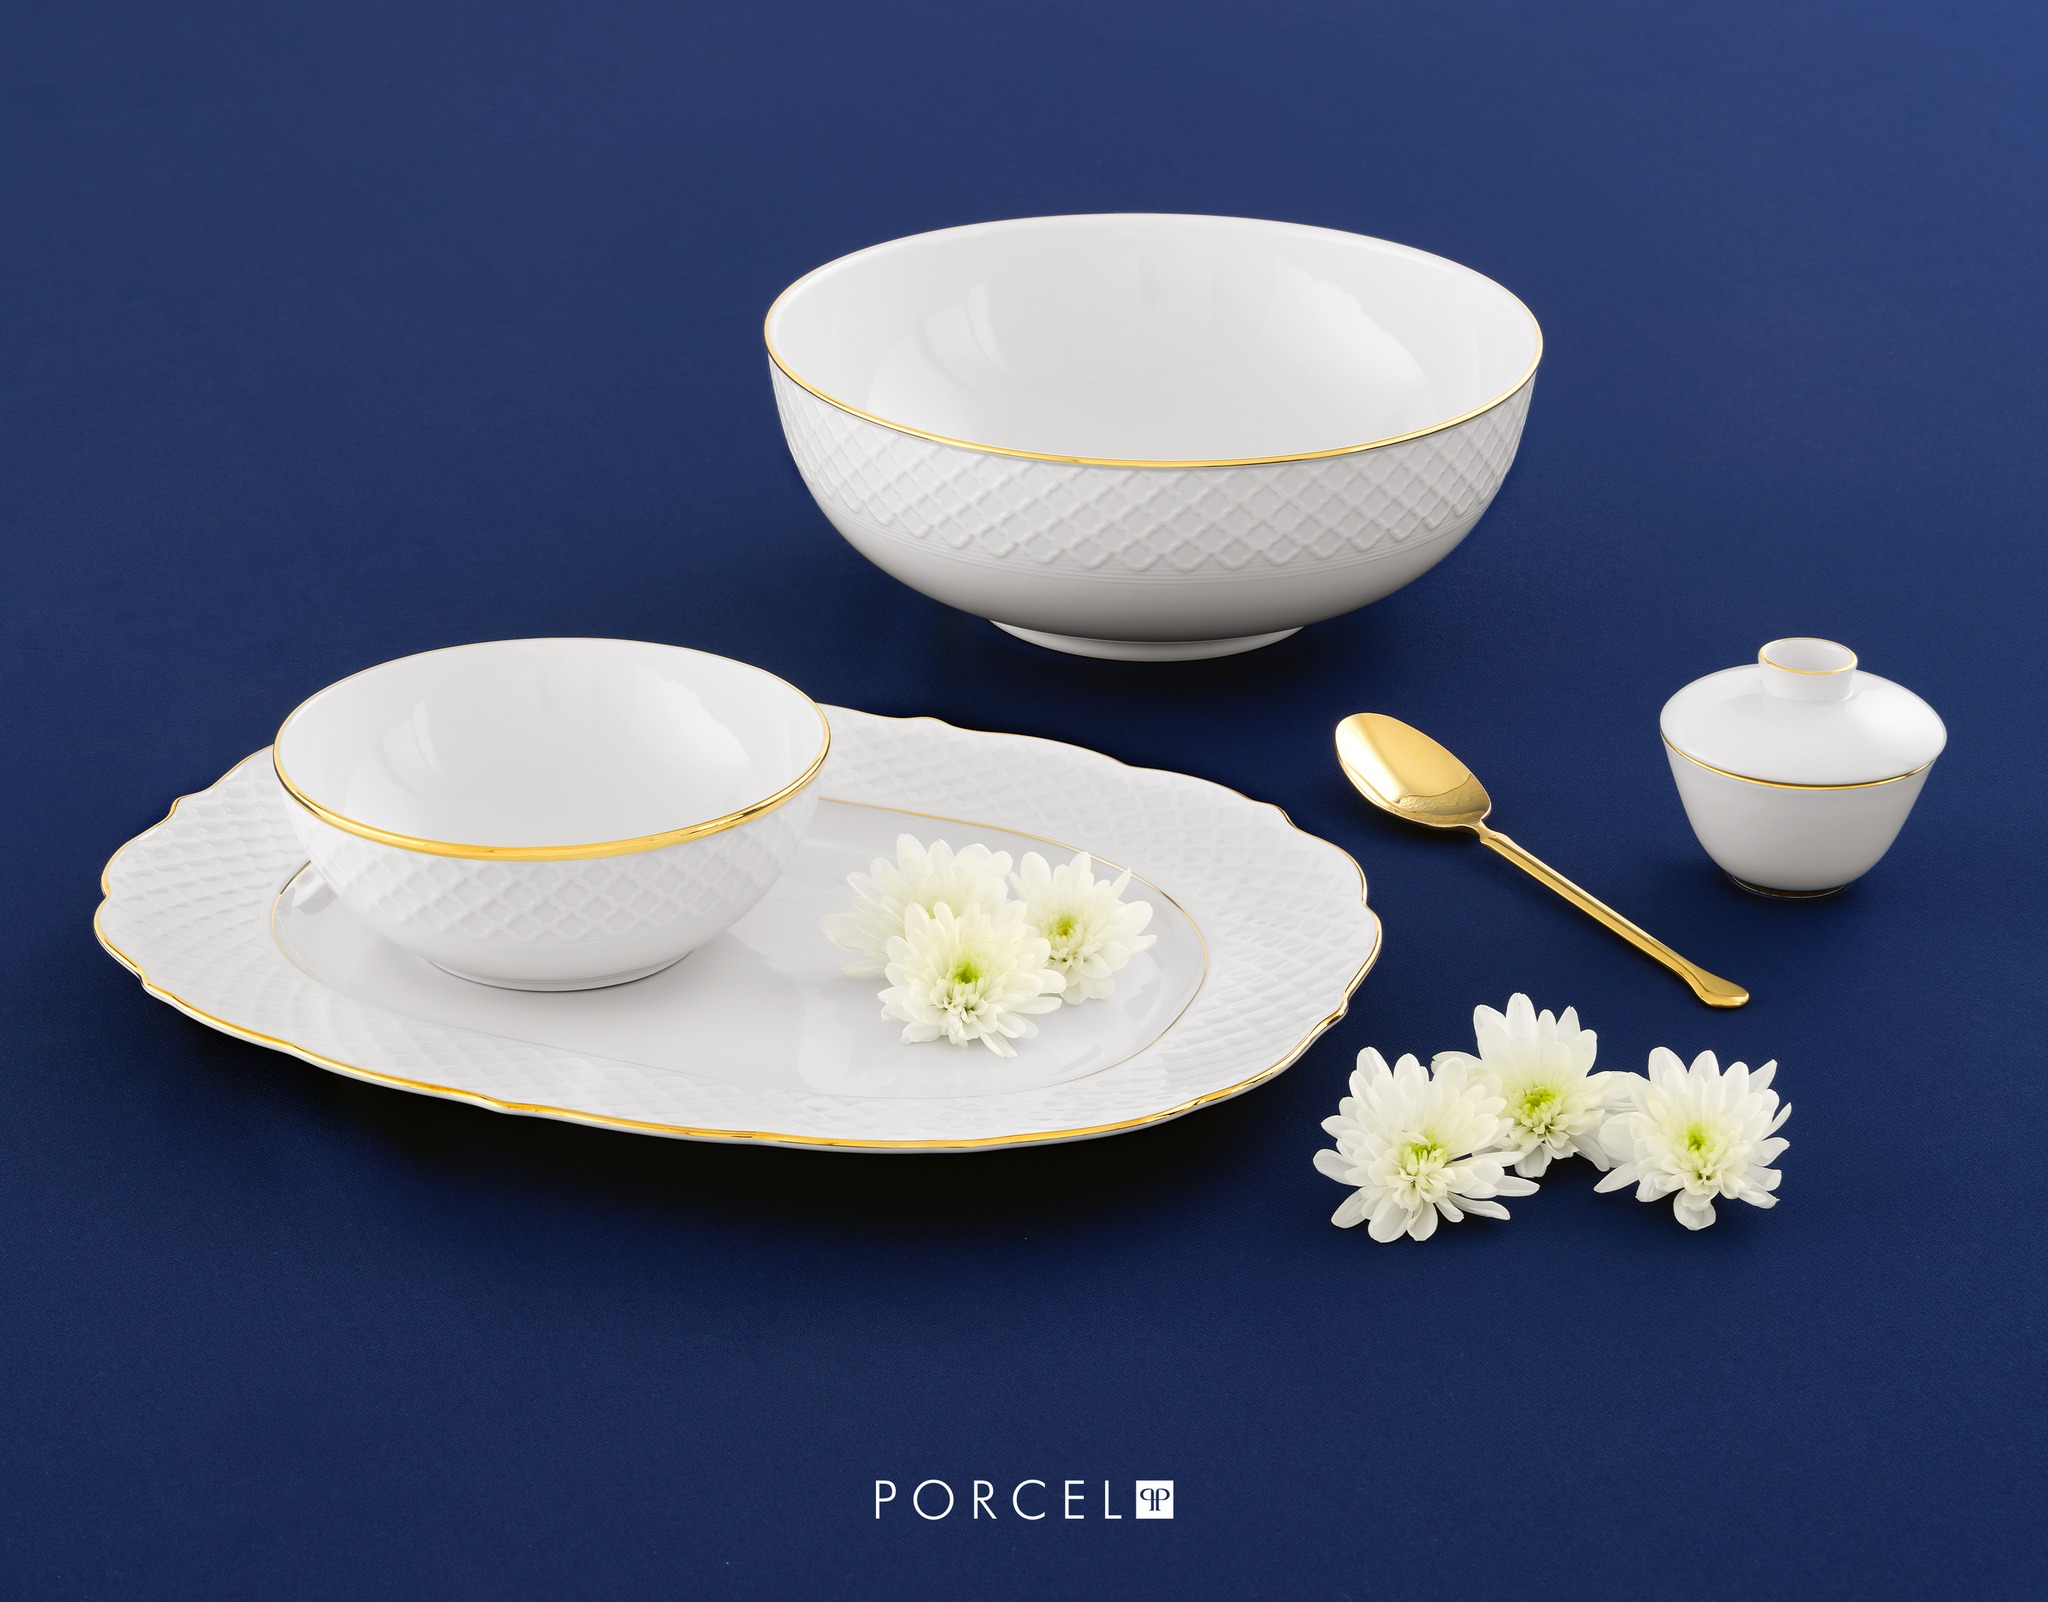 Porcel presents two new collections at the Ambiente Fair for the first time